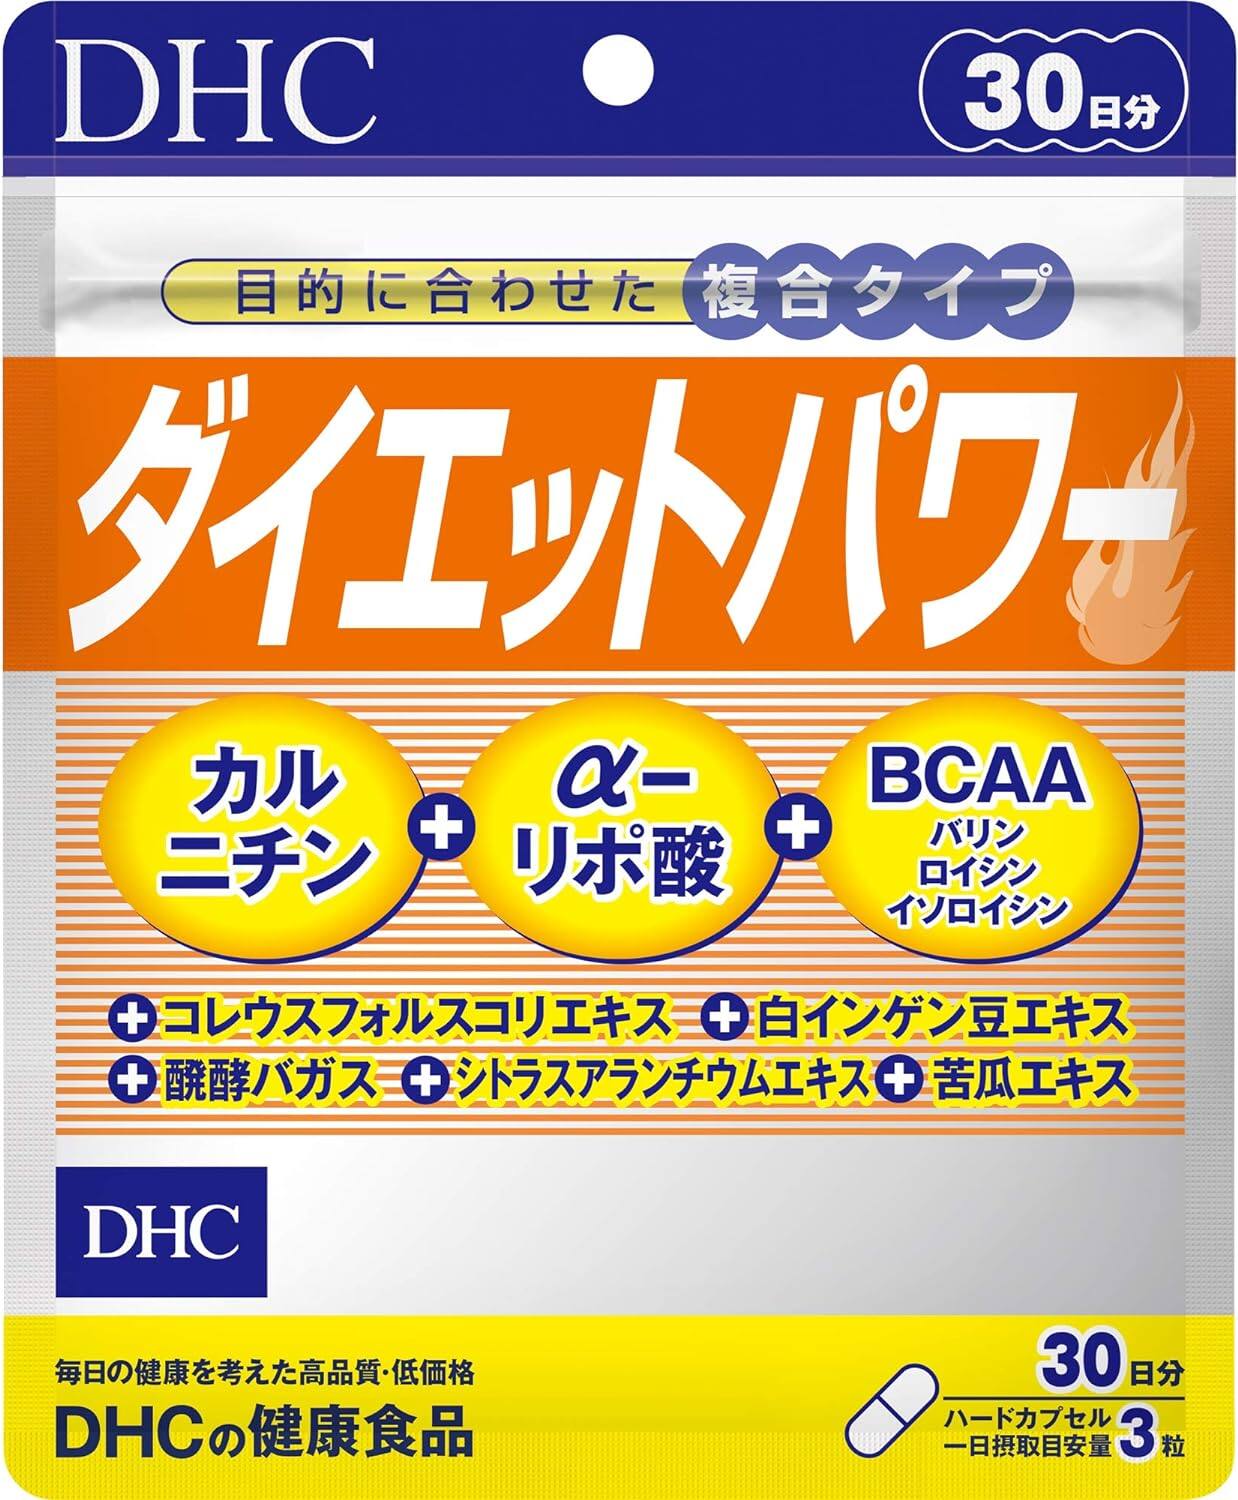 DHC diet power 30 days 90 tablets Authentic Ship From Japan